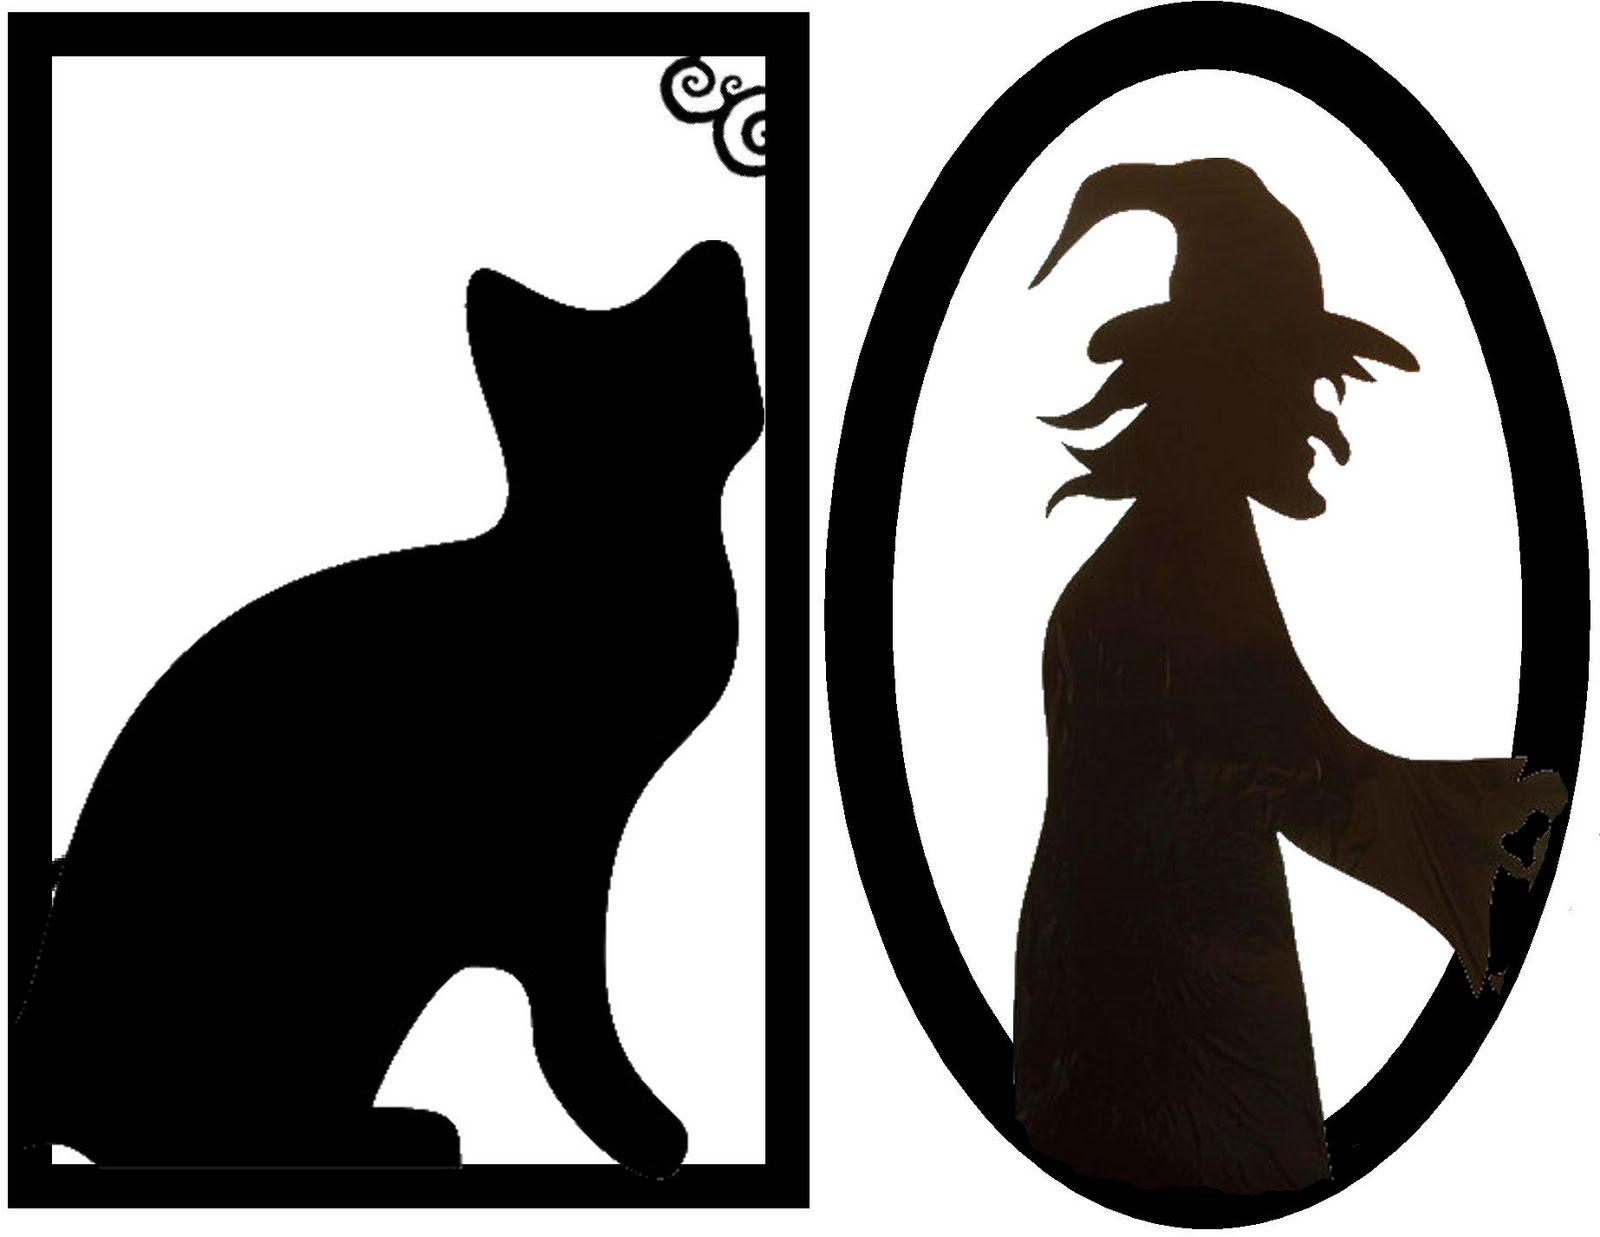 Framed Creepy Silhouette Decorations (Free Halloween Printable - Free Printable Halloween Decorations Scary